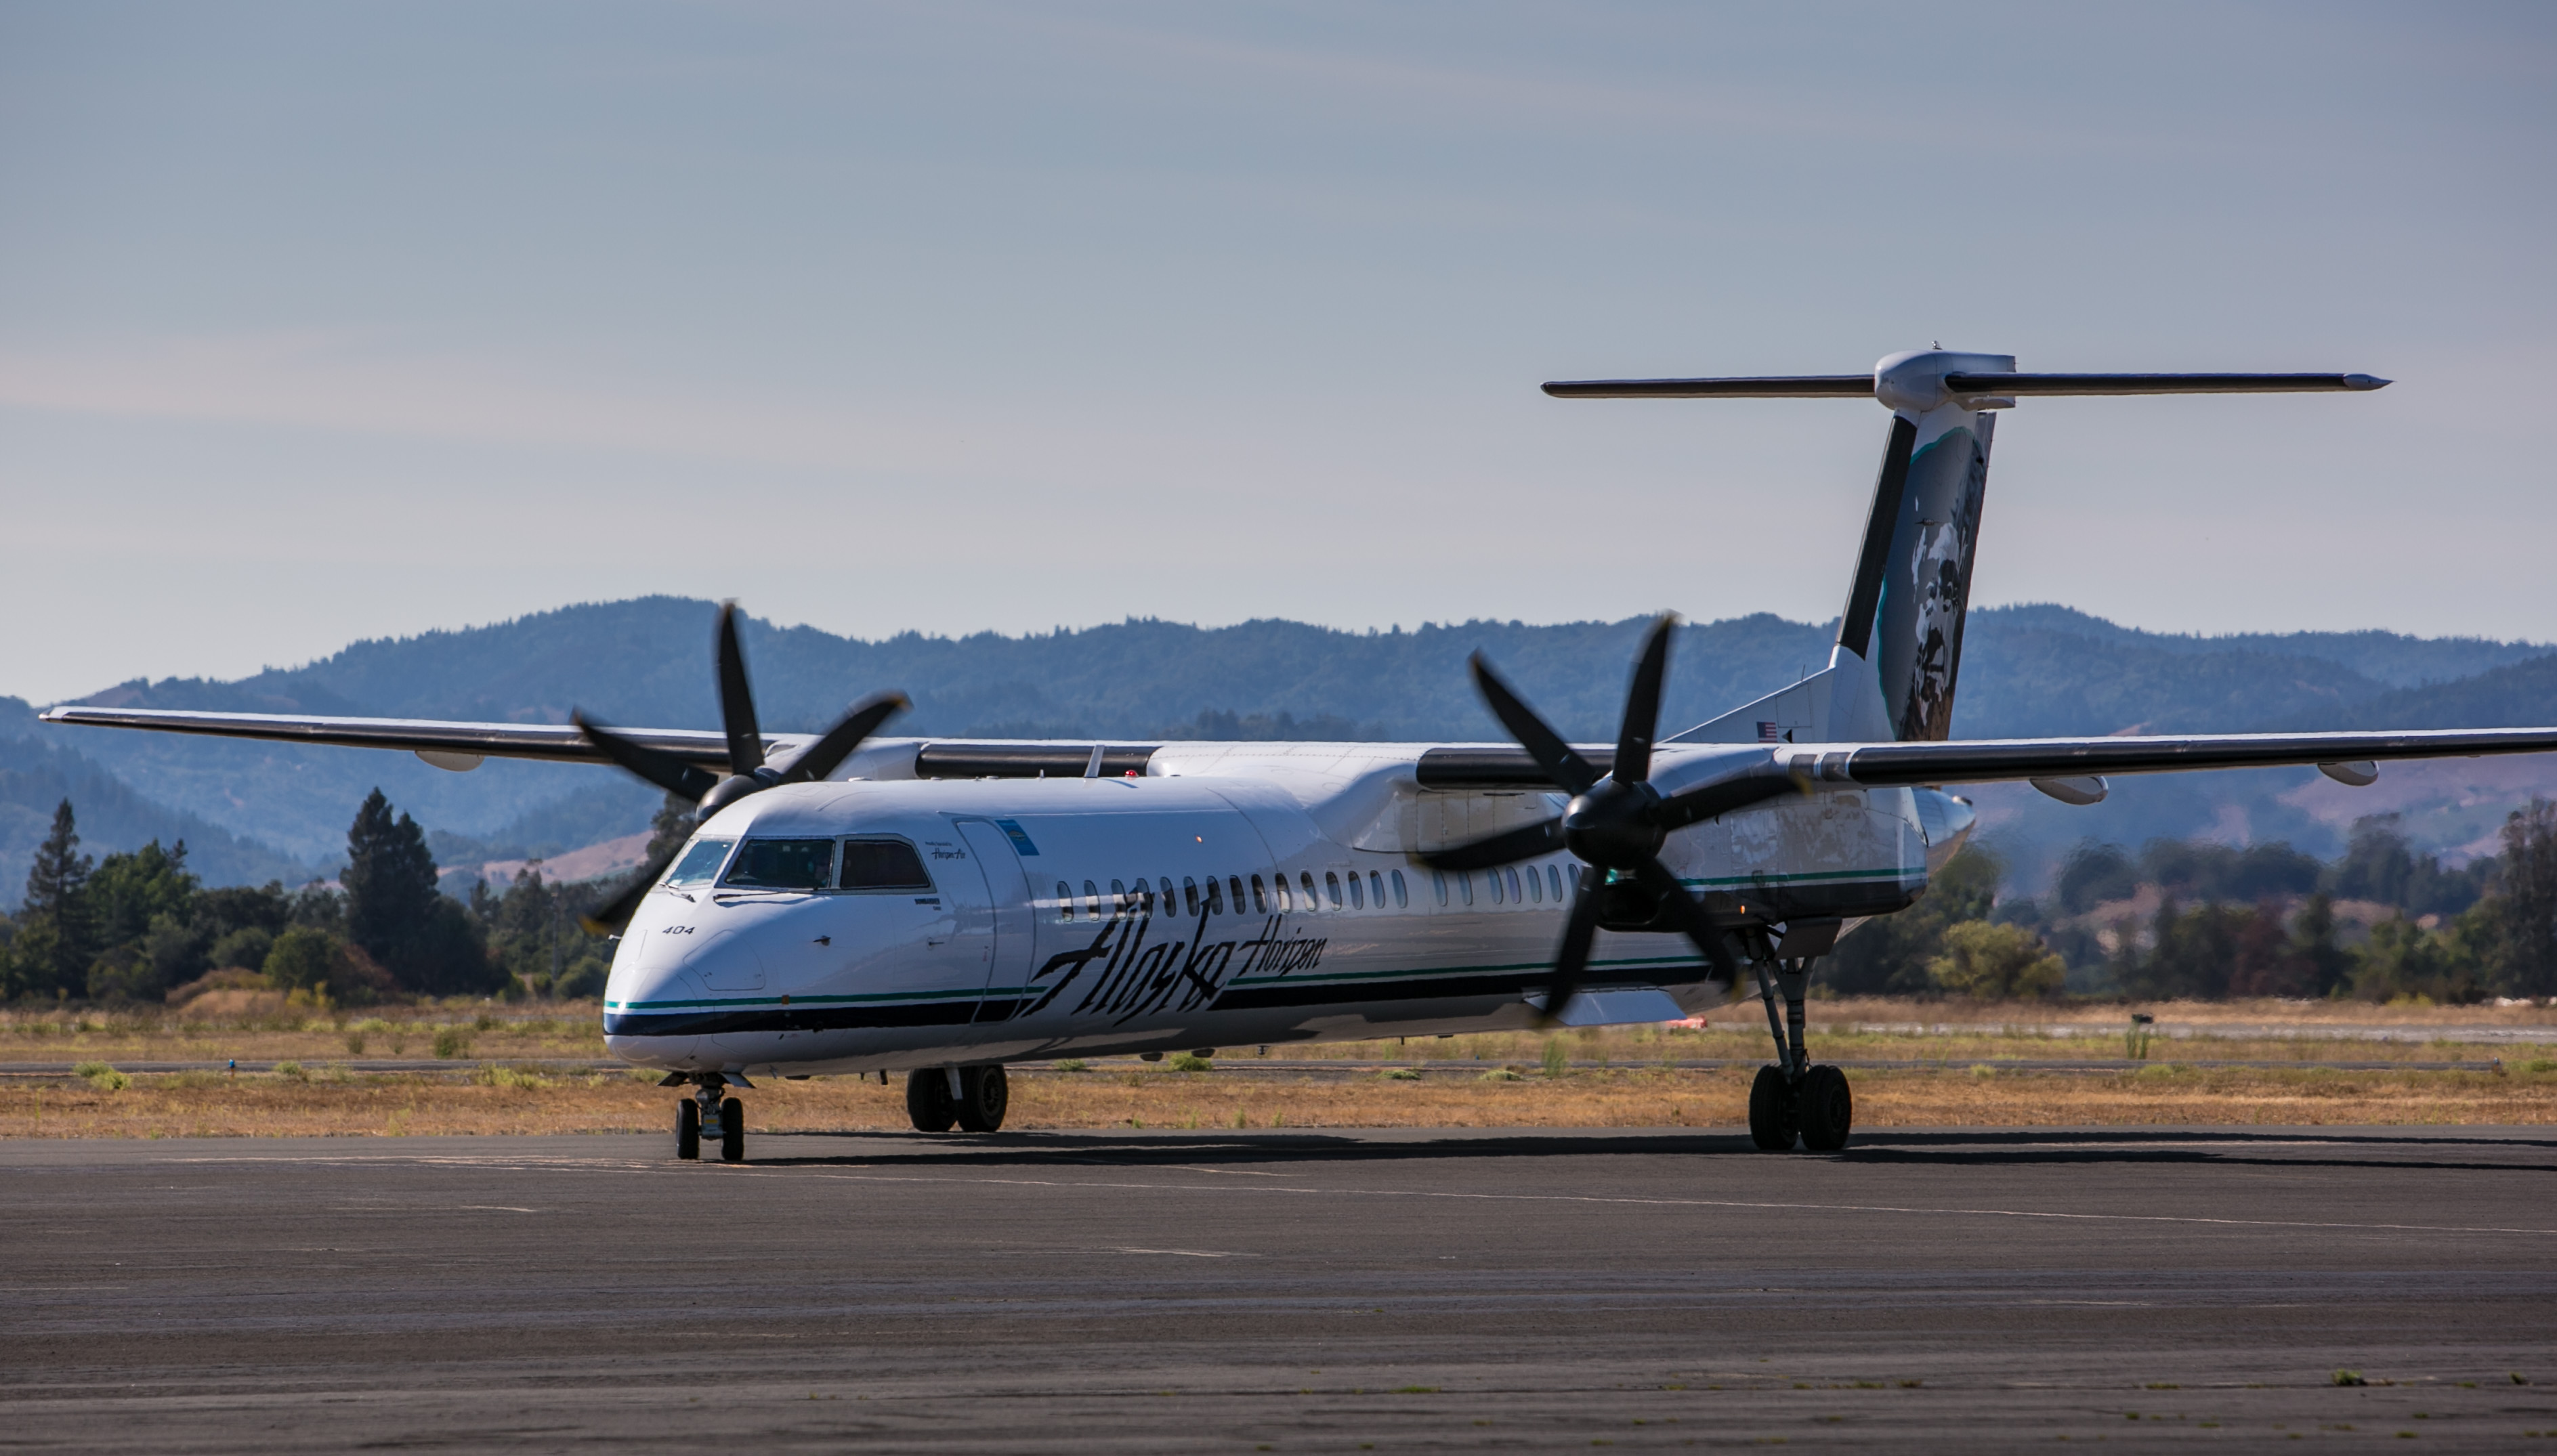 An Alaska Airlines Bombardier Q-400 regional turbo prop plane pulls into the gate at Charles M. Schulz Airport on August 27, 2014, near Healdsburg, California. (George Rose—Getty Images)